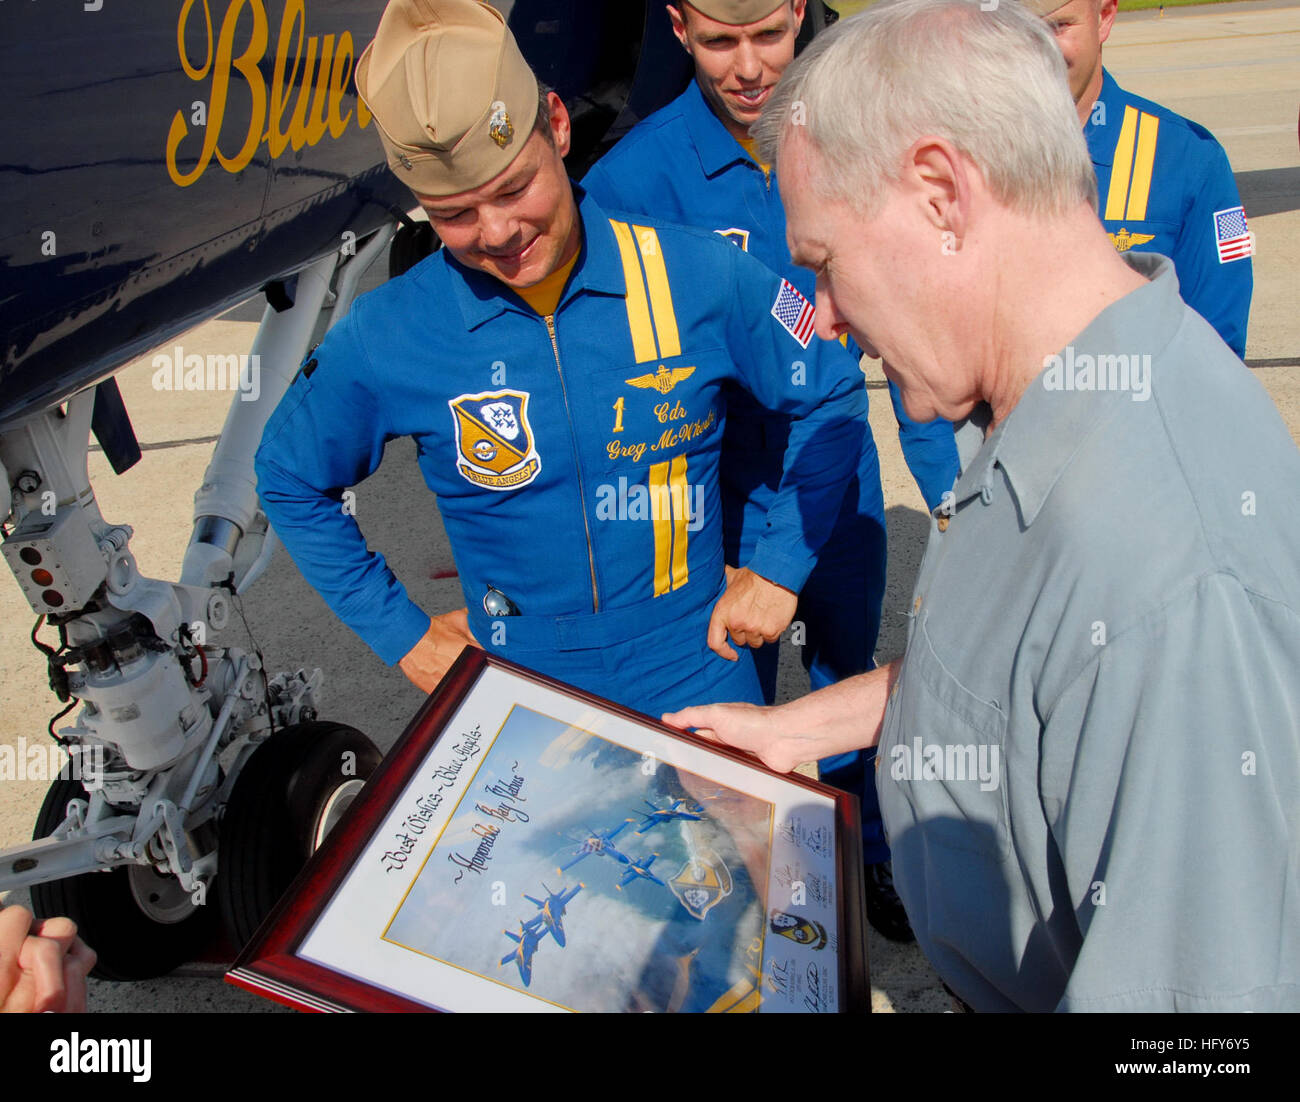 100516-N-8732C-299 JOINT BASE ANDREWS, Md. (May 16, 2010) Cmdr. Greg McWherter, left, Commanding Officer of the U.S. Navy flight demonstration team, the Blue Angels, presents Secretary of the Navy (SECNAV) Ray Mabus an autographed memento of the Blue Angels flight demonstration team in flight. The Blue Angels performed during the 2010 Joint Service Open House Air Show at Joint Base Andrews, Md. (U.S. Navy photo by Joseph P Cirone/Released) US Navy 100516-N-8732C-299 Cmdr. Greg McWherter presents Secretary of the Navy Ray Mabus an autographed memento of the Blue Angels flight demonstration team Stock Photo